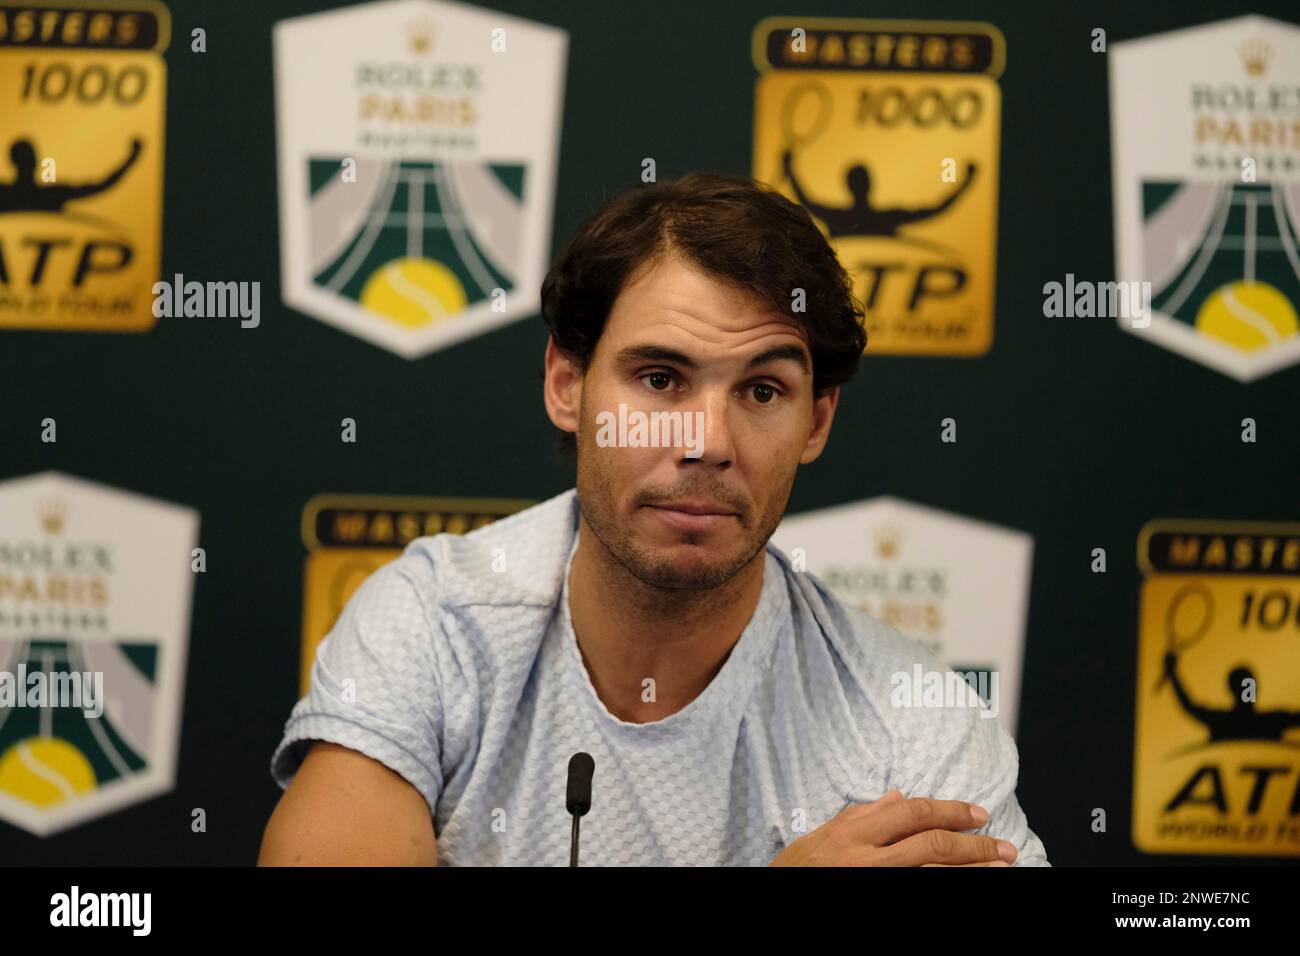 October 31, 2018 - Paris, France - The Spanish player RAFAEL NADAL world  number one announces his misdraw of the Rolex Paris Master tournaments at  AccorHotel arena Paris France (Credit Image: ©